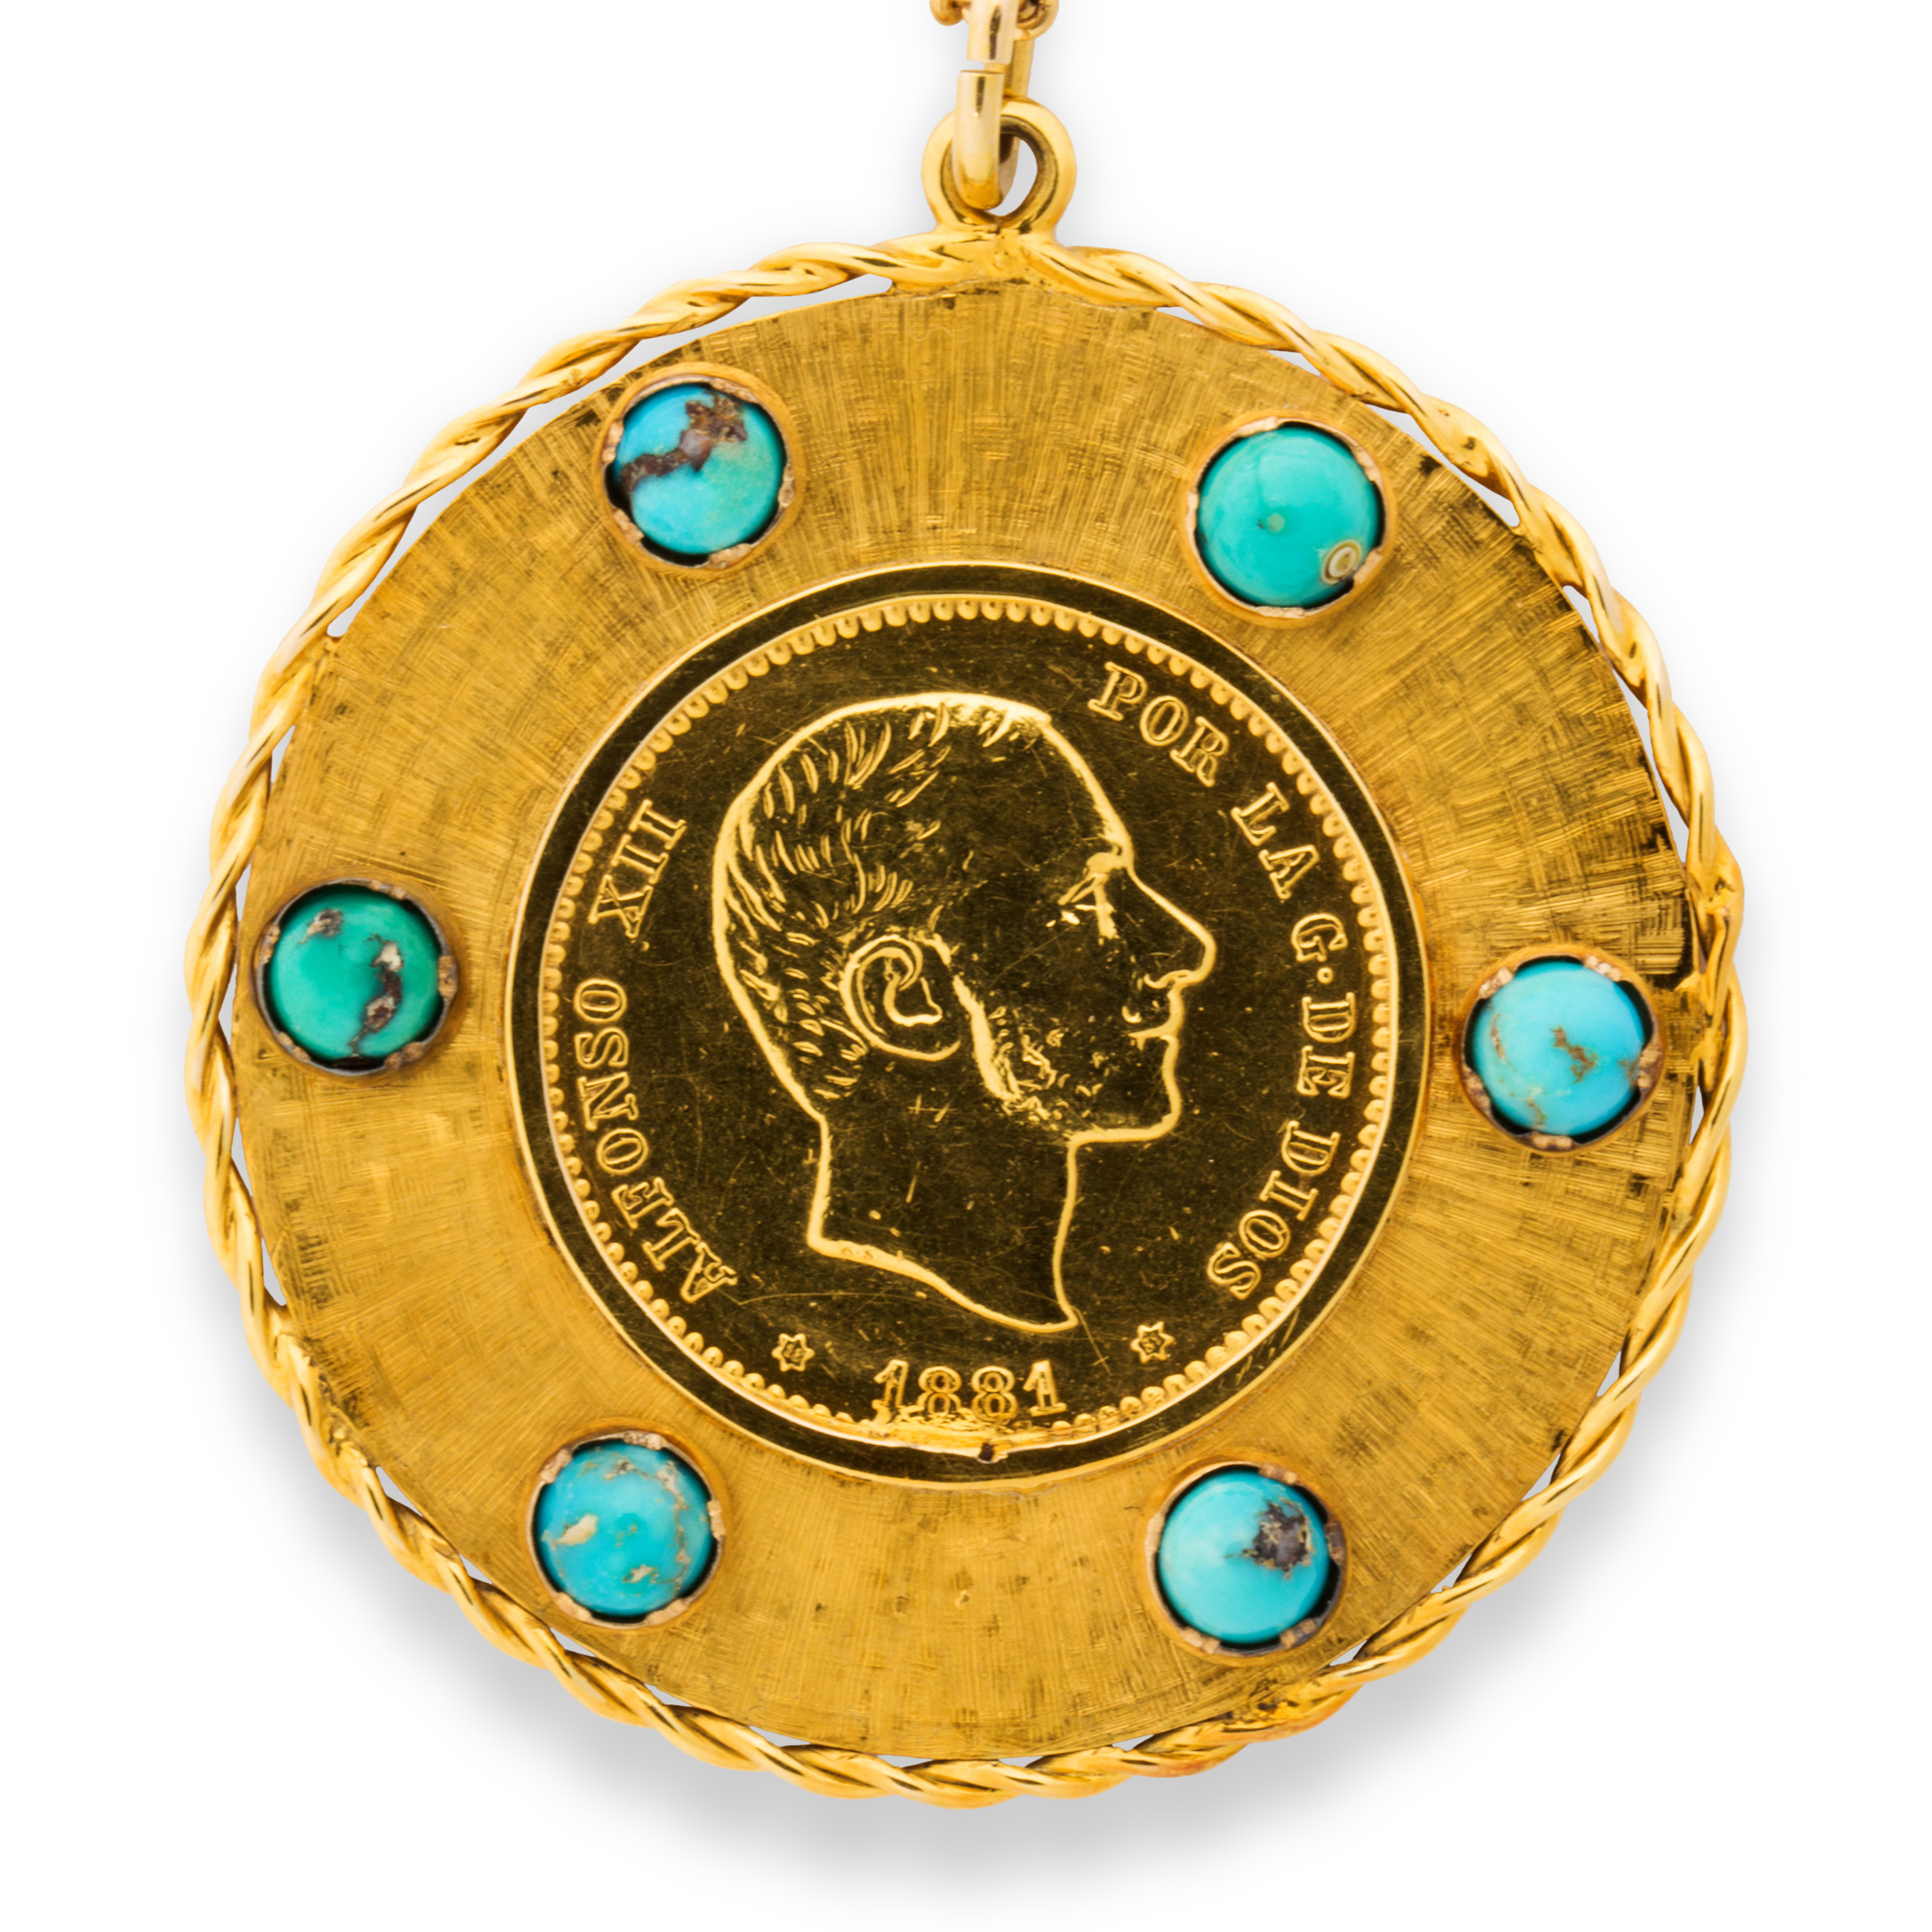 A GOLD COIN TURQUOISE AND GOLD 3a267e